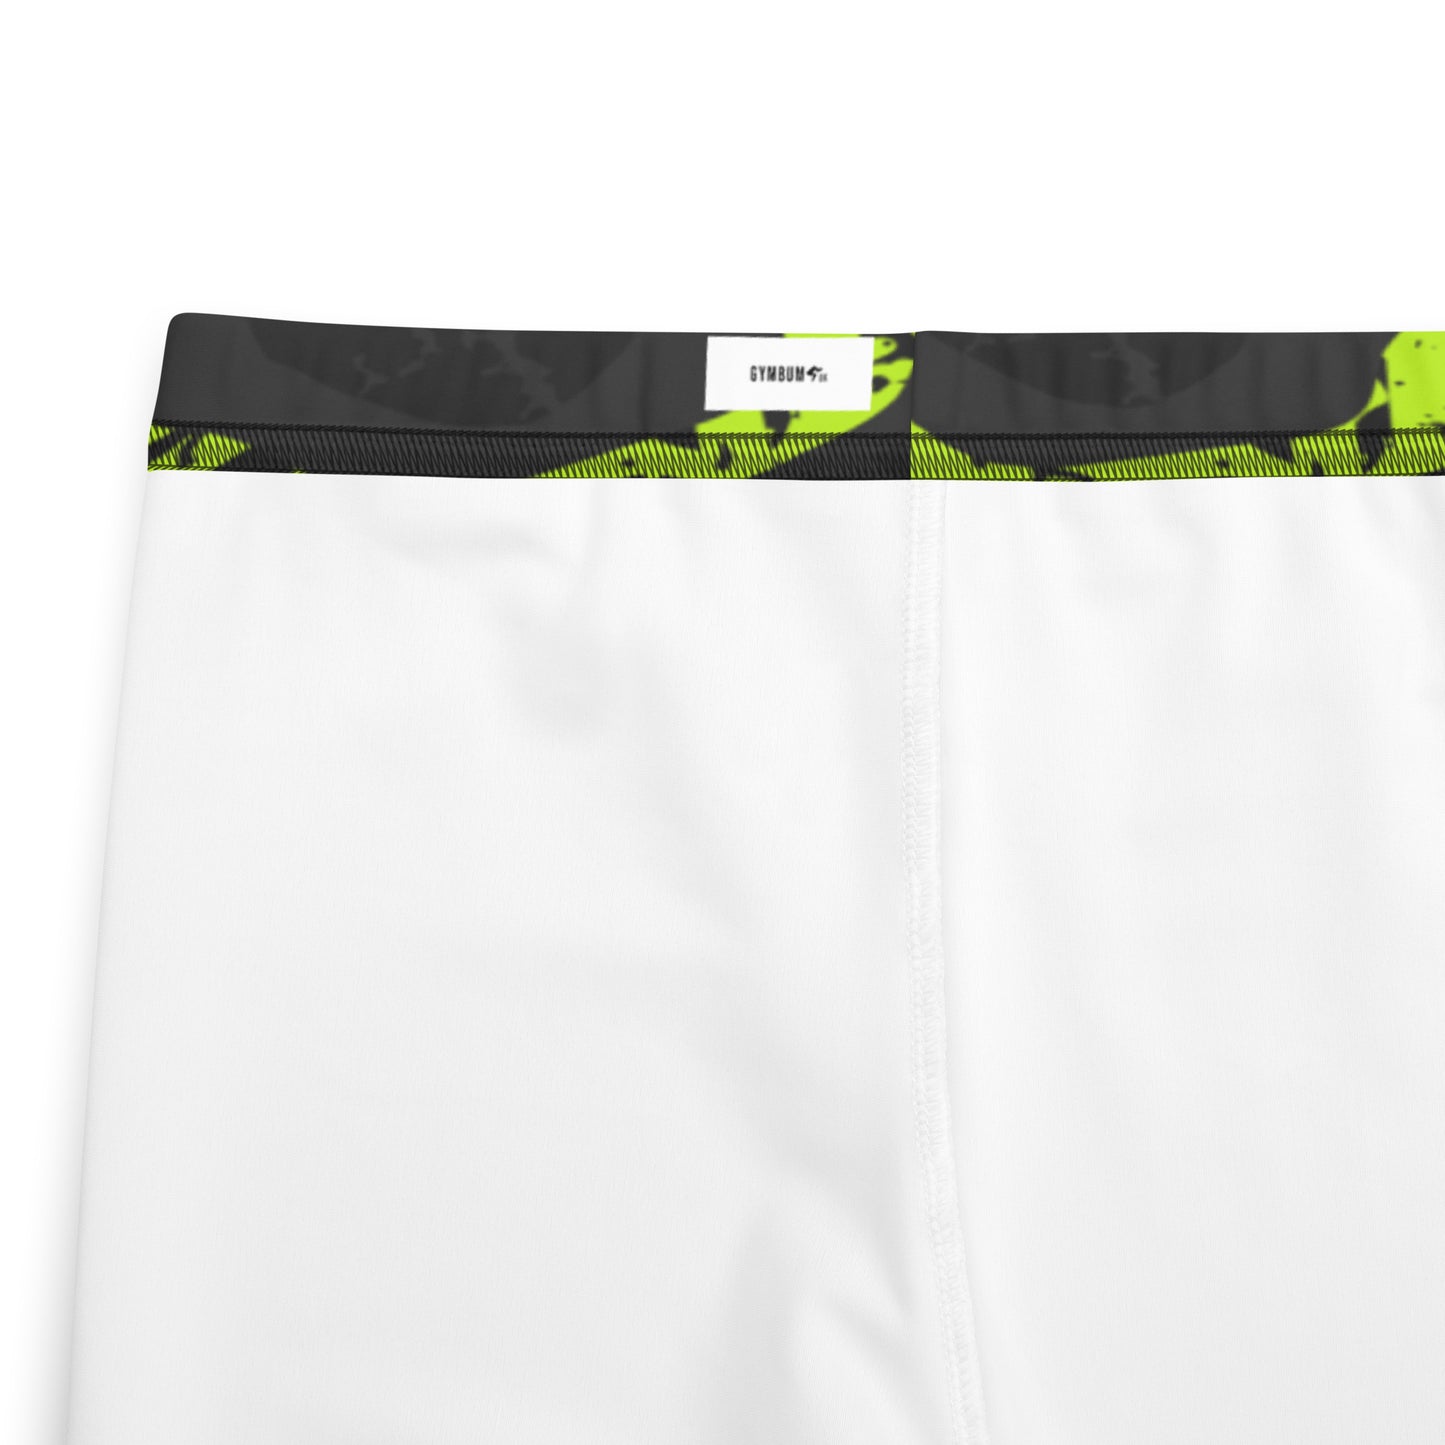 The Gymbum UK QuickDry Green Charge Youth Leggings